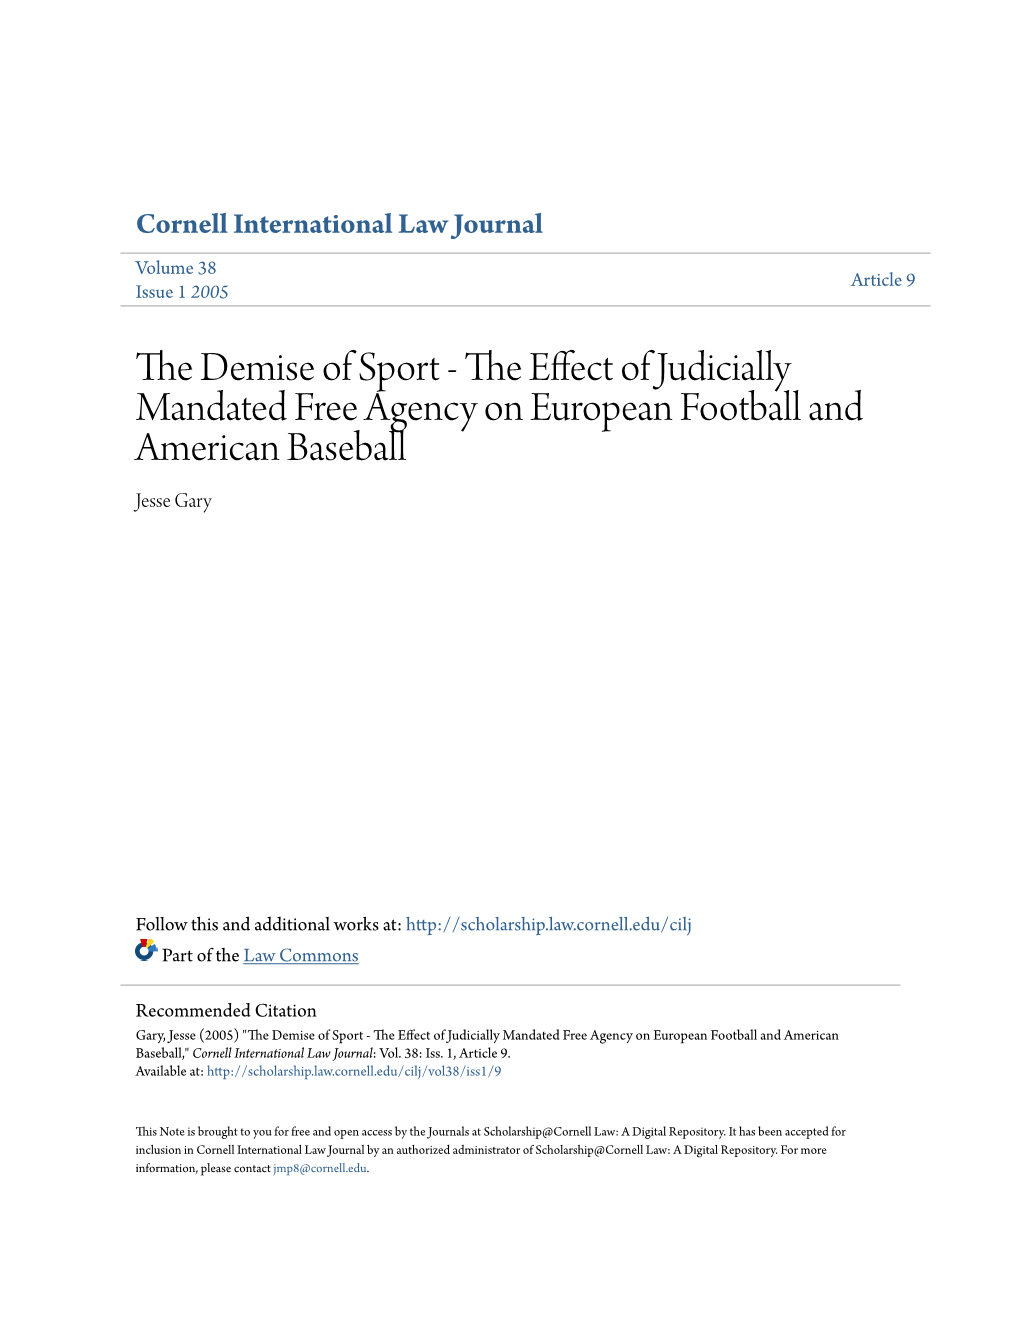 The Effect of Judicially Mandated Free Agency on European Football and American Baseball," Cornell International Law Journal: Vol